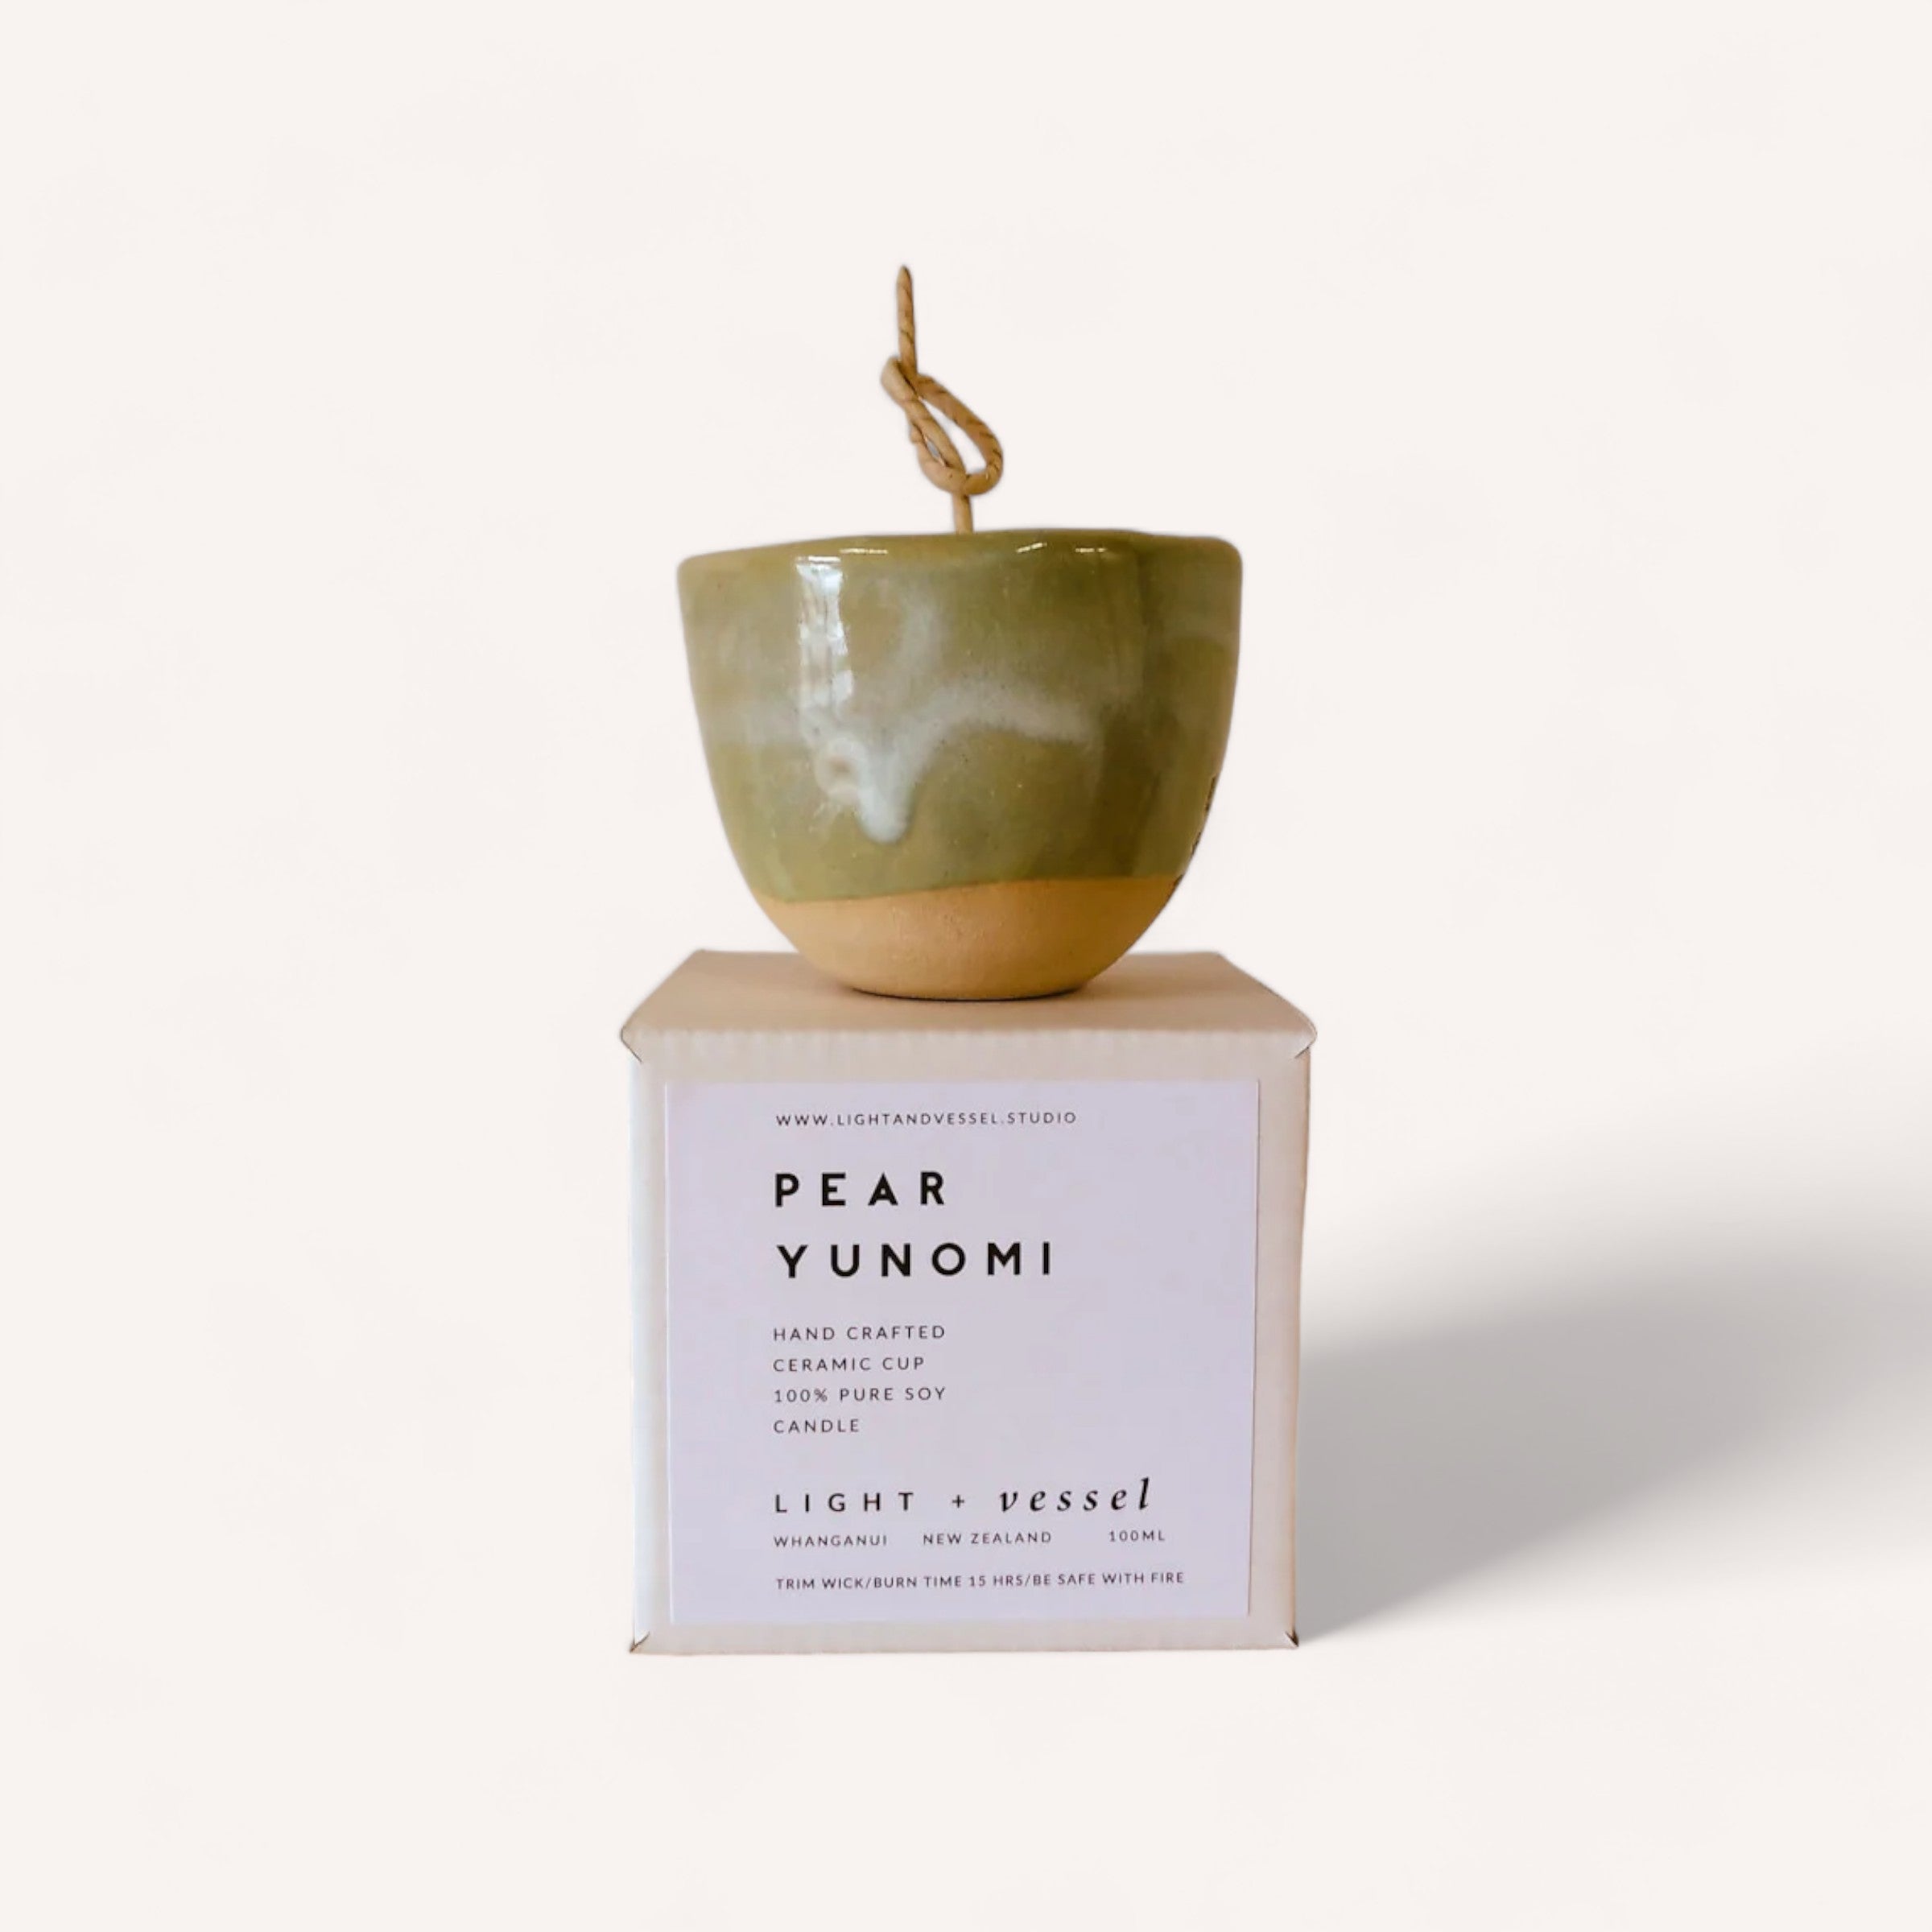 Handcrafted ceramic yunomi teacup elegantly displayed on its packaging, boasting an earthy green glaze with a rustic aesthetic, now accompanied by a Pear Candle by Light + Vessel to enhance the ambiance.